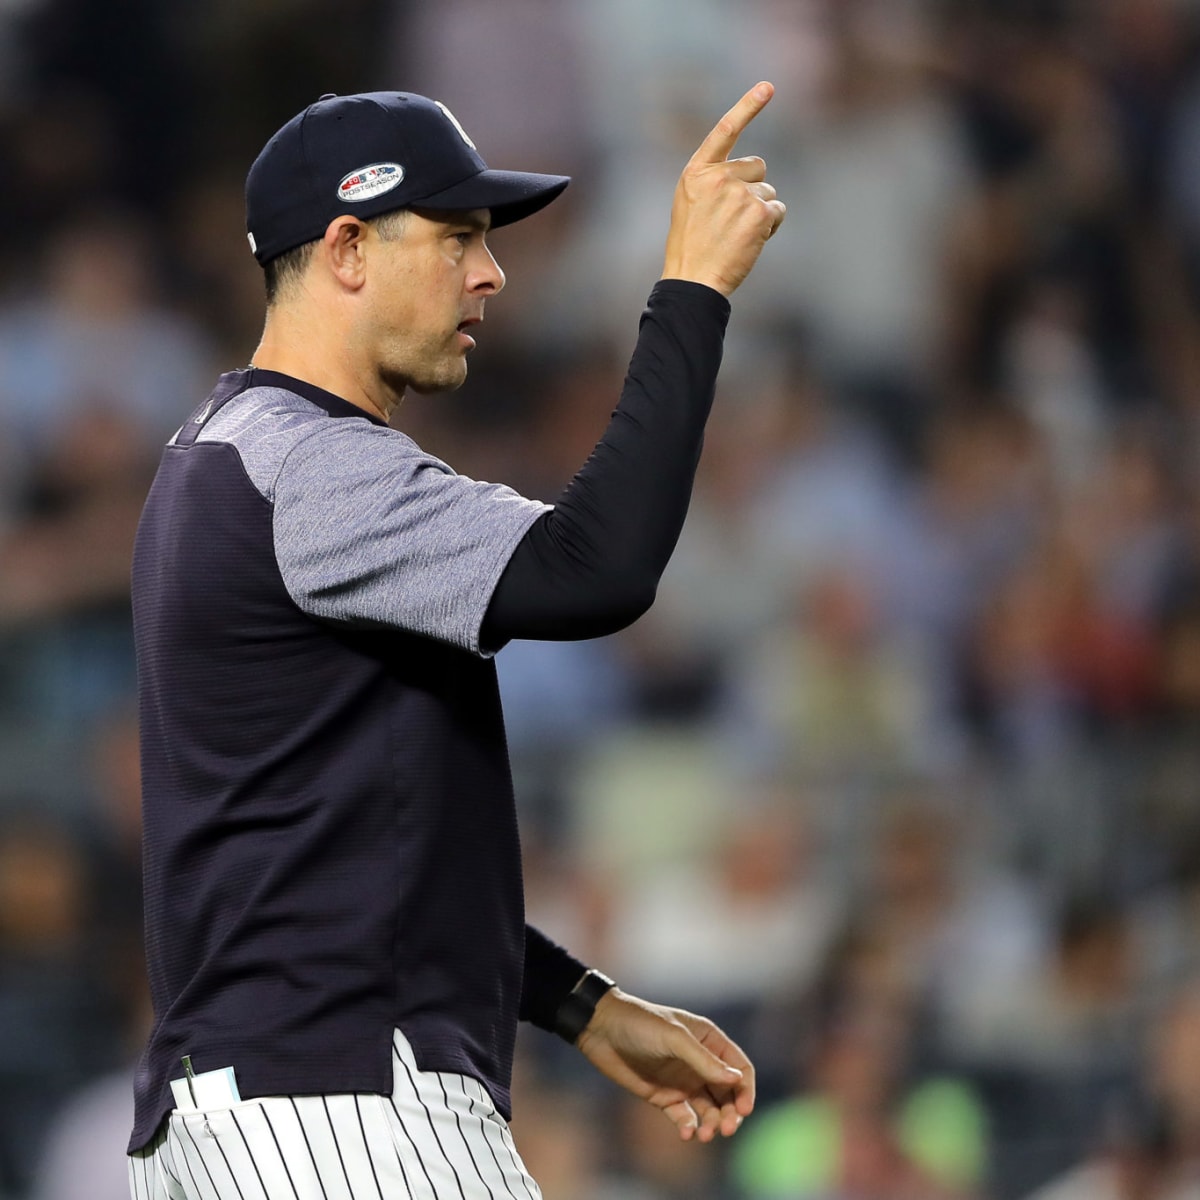 Watch: Aaron Boone ejected for arguing questionable interference